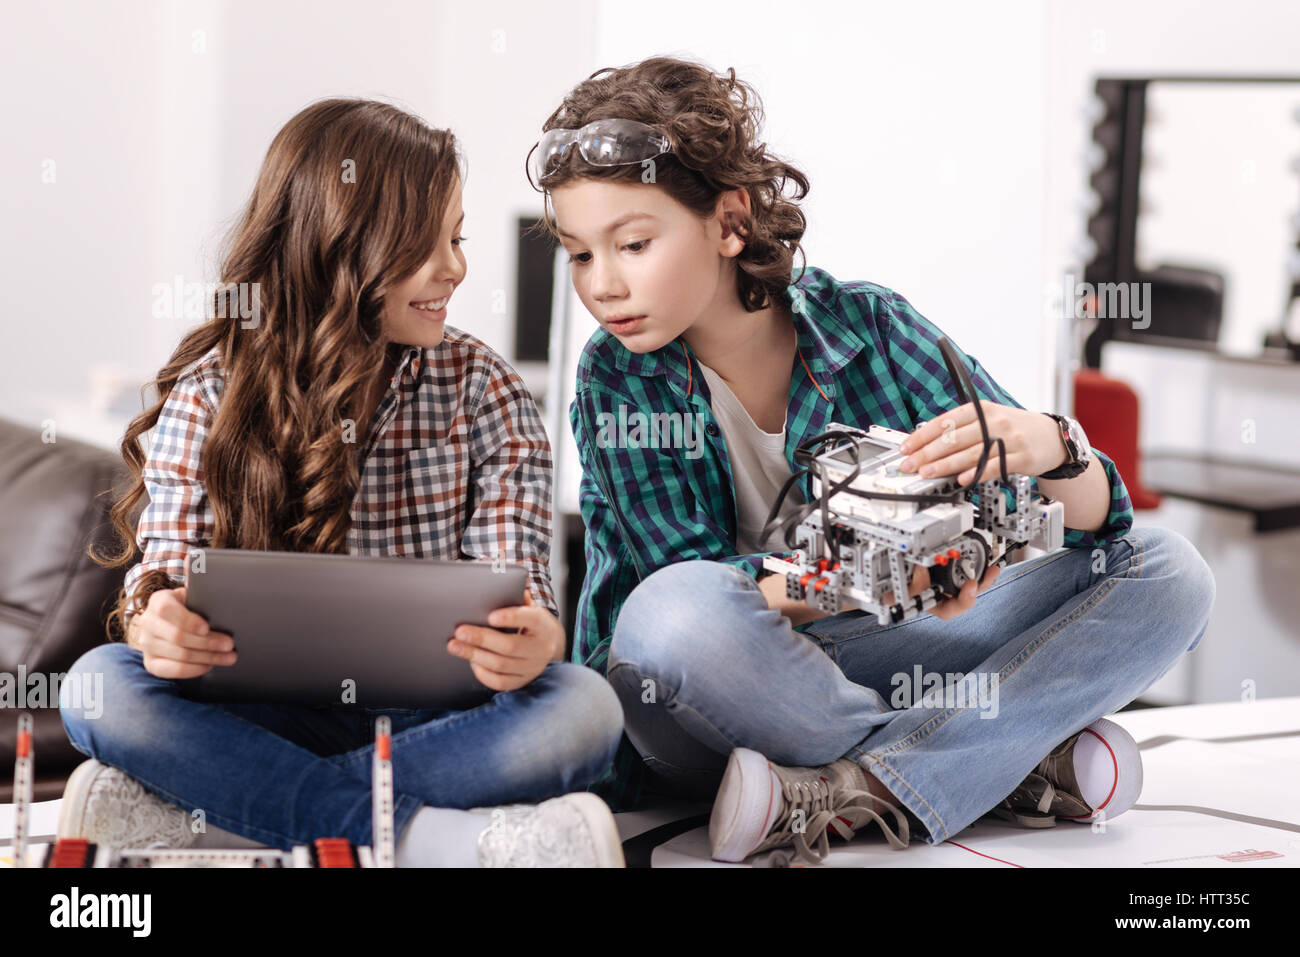 Curious friends using modern gadgets and devices at home Stock Photo